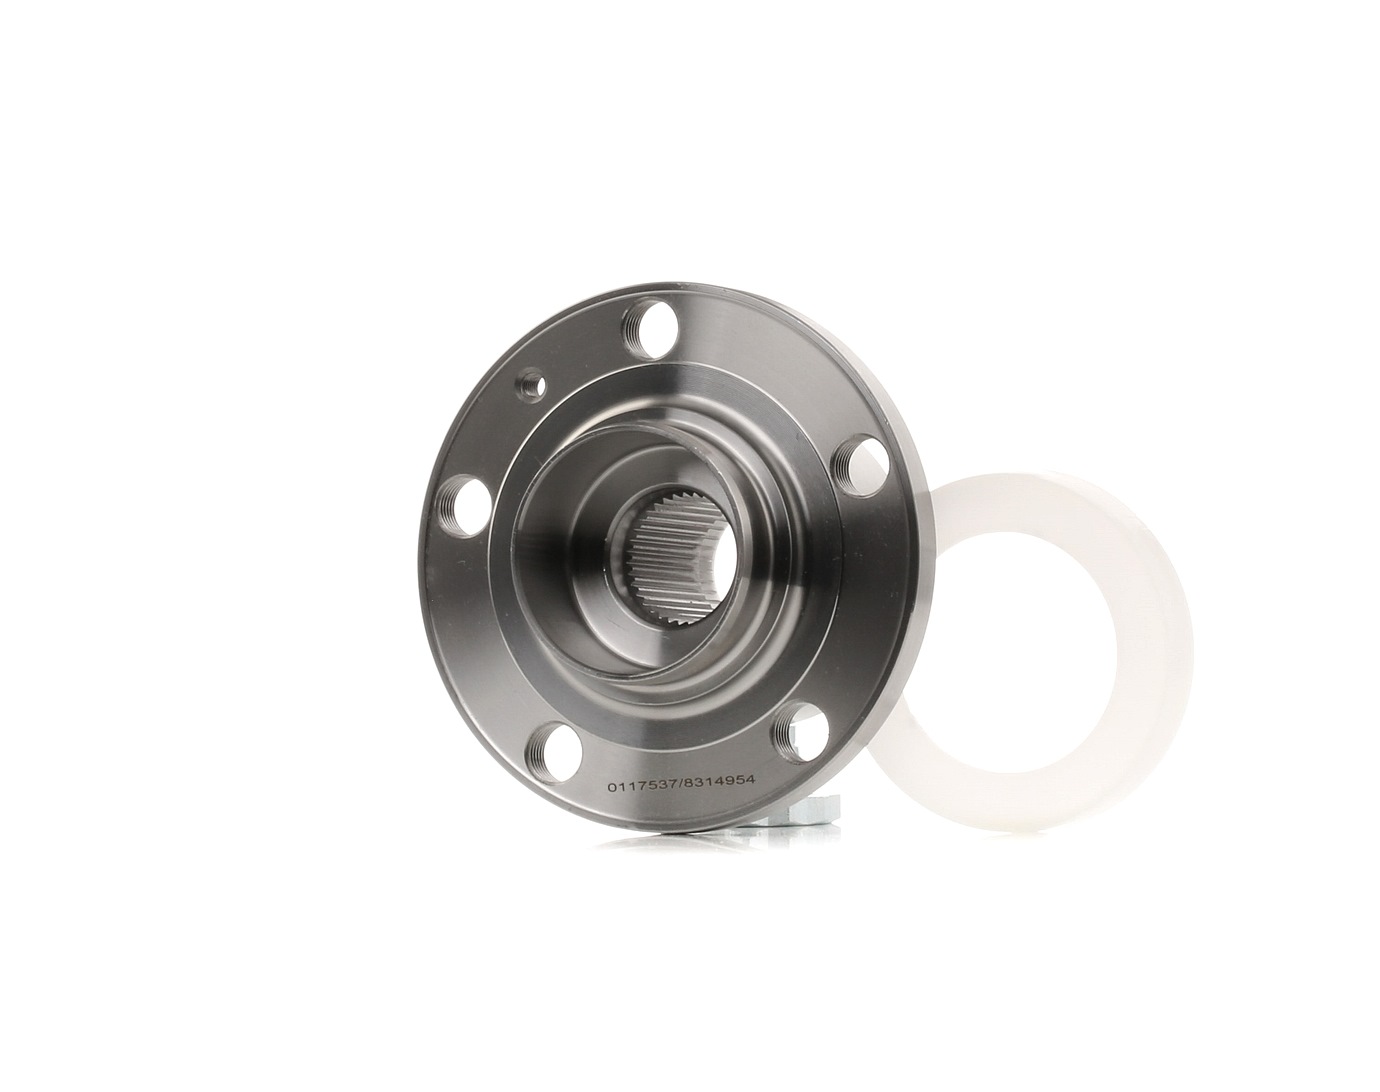 SKWB-0180773 STARK Wheel bearings SKODA Front Axle, Left, Right, with integrated magnetic sensor ring, 120 mm